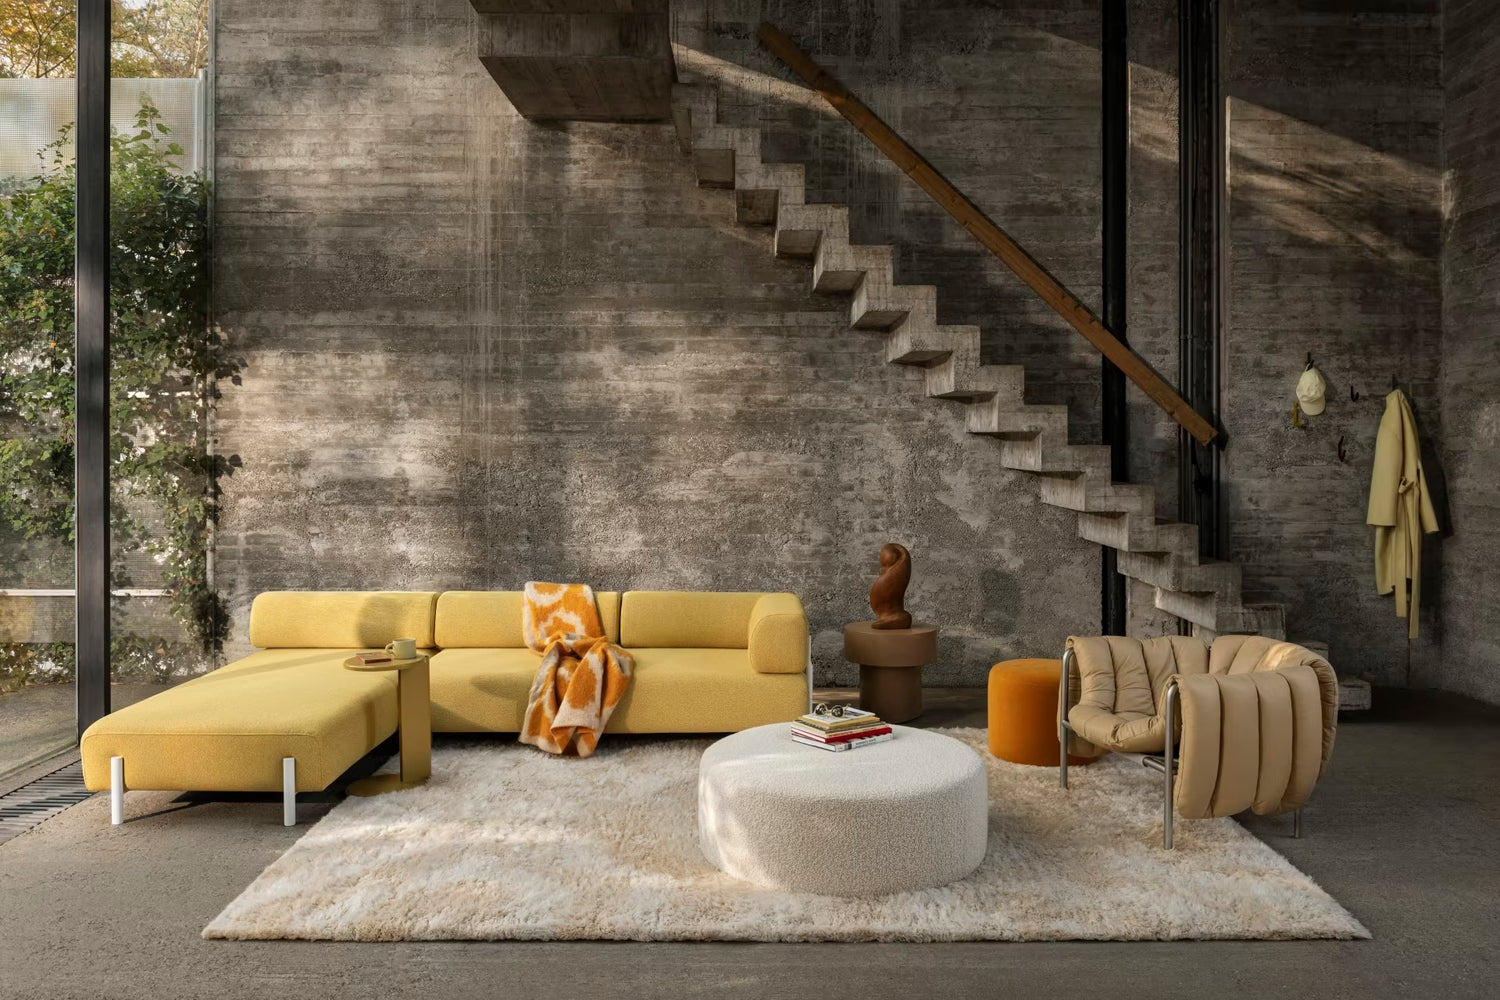 A modern living room featuring a yellow sectional sofa with a throw blanket, a beige round ottoman, a light brown armchair, and a small side table with a decorative item and books. The room has a concrete wall with a staircase and a tall window showing greenery outside.